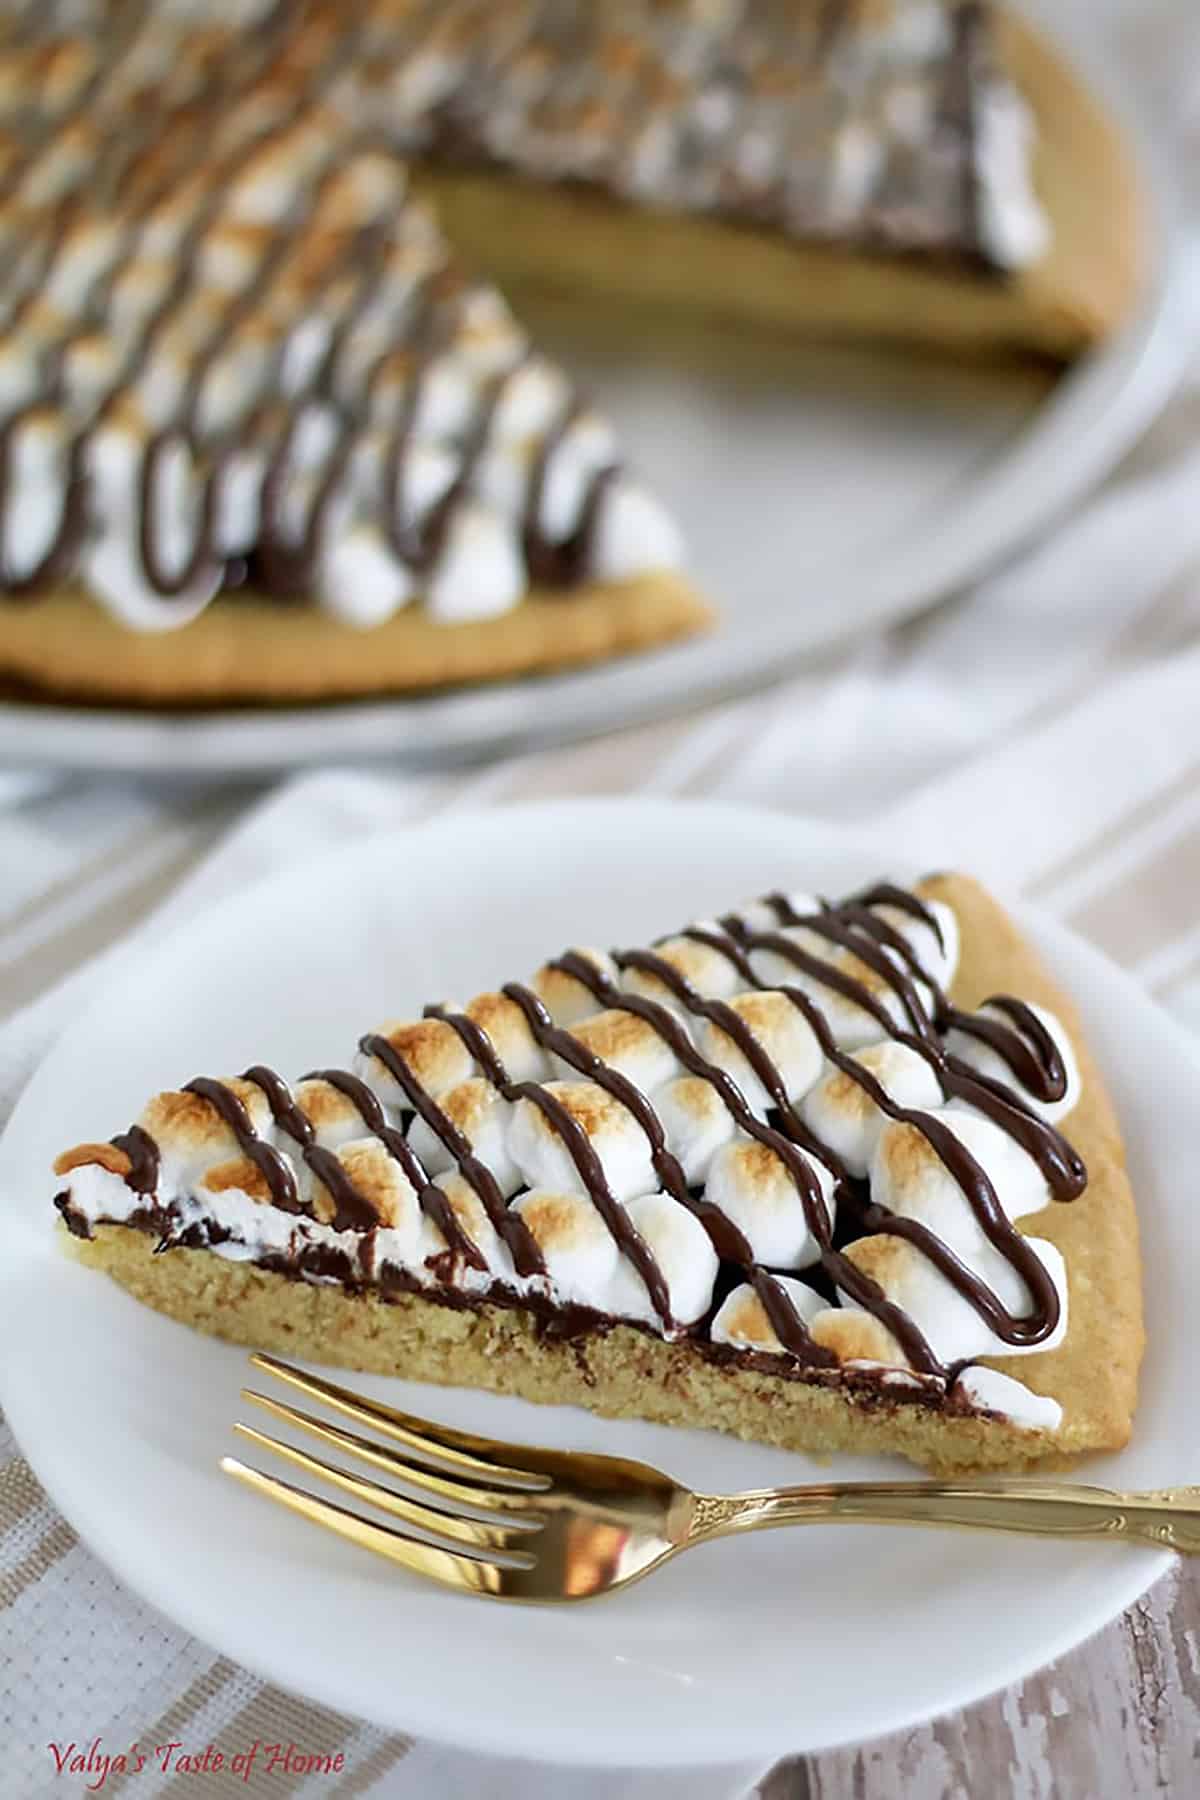 This S'mores Dessert Pizza crust is made out of the Easy Homemade Sugar Cookie Dough Recipe. The baked pizza tastes just like your typical S'mores. And it’s super easy to make!